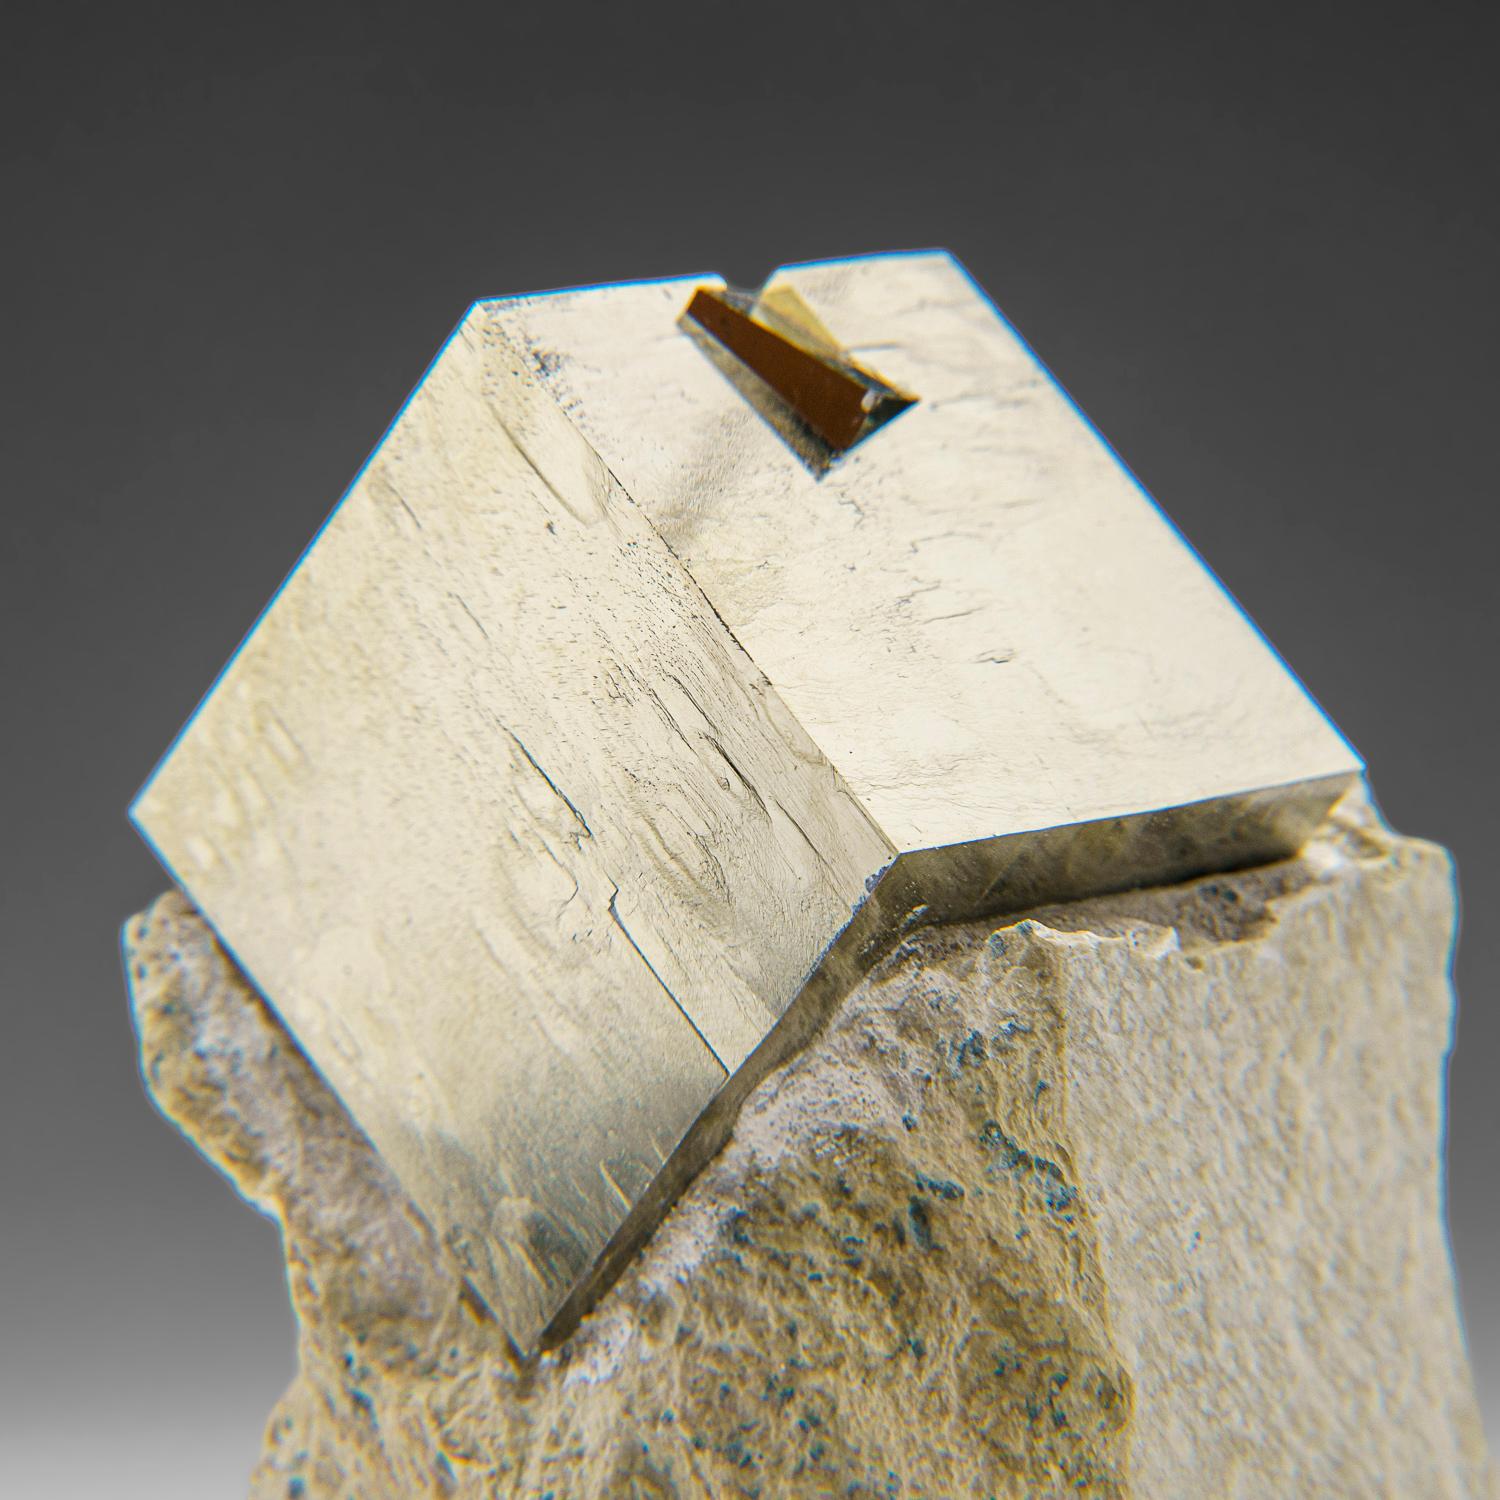 Sharp cubic metallic pyrite crystal in tan-colored Basalt matrix. The pyrite crystal has smooth crystal faces with almost mirror-like luster, stands upright nicely without additional support. A must-have for any collection, these unique formations